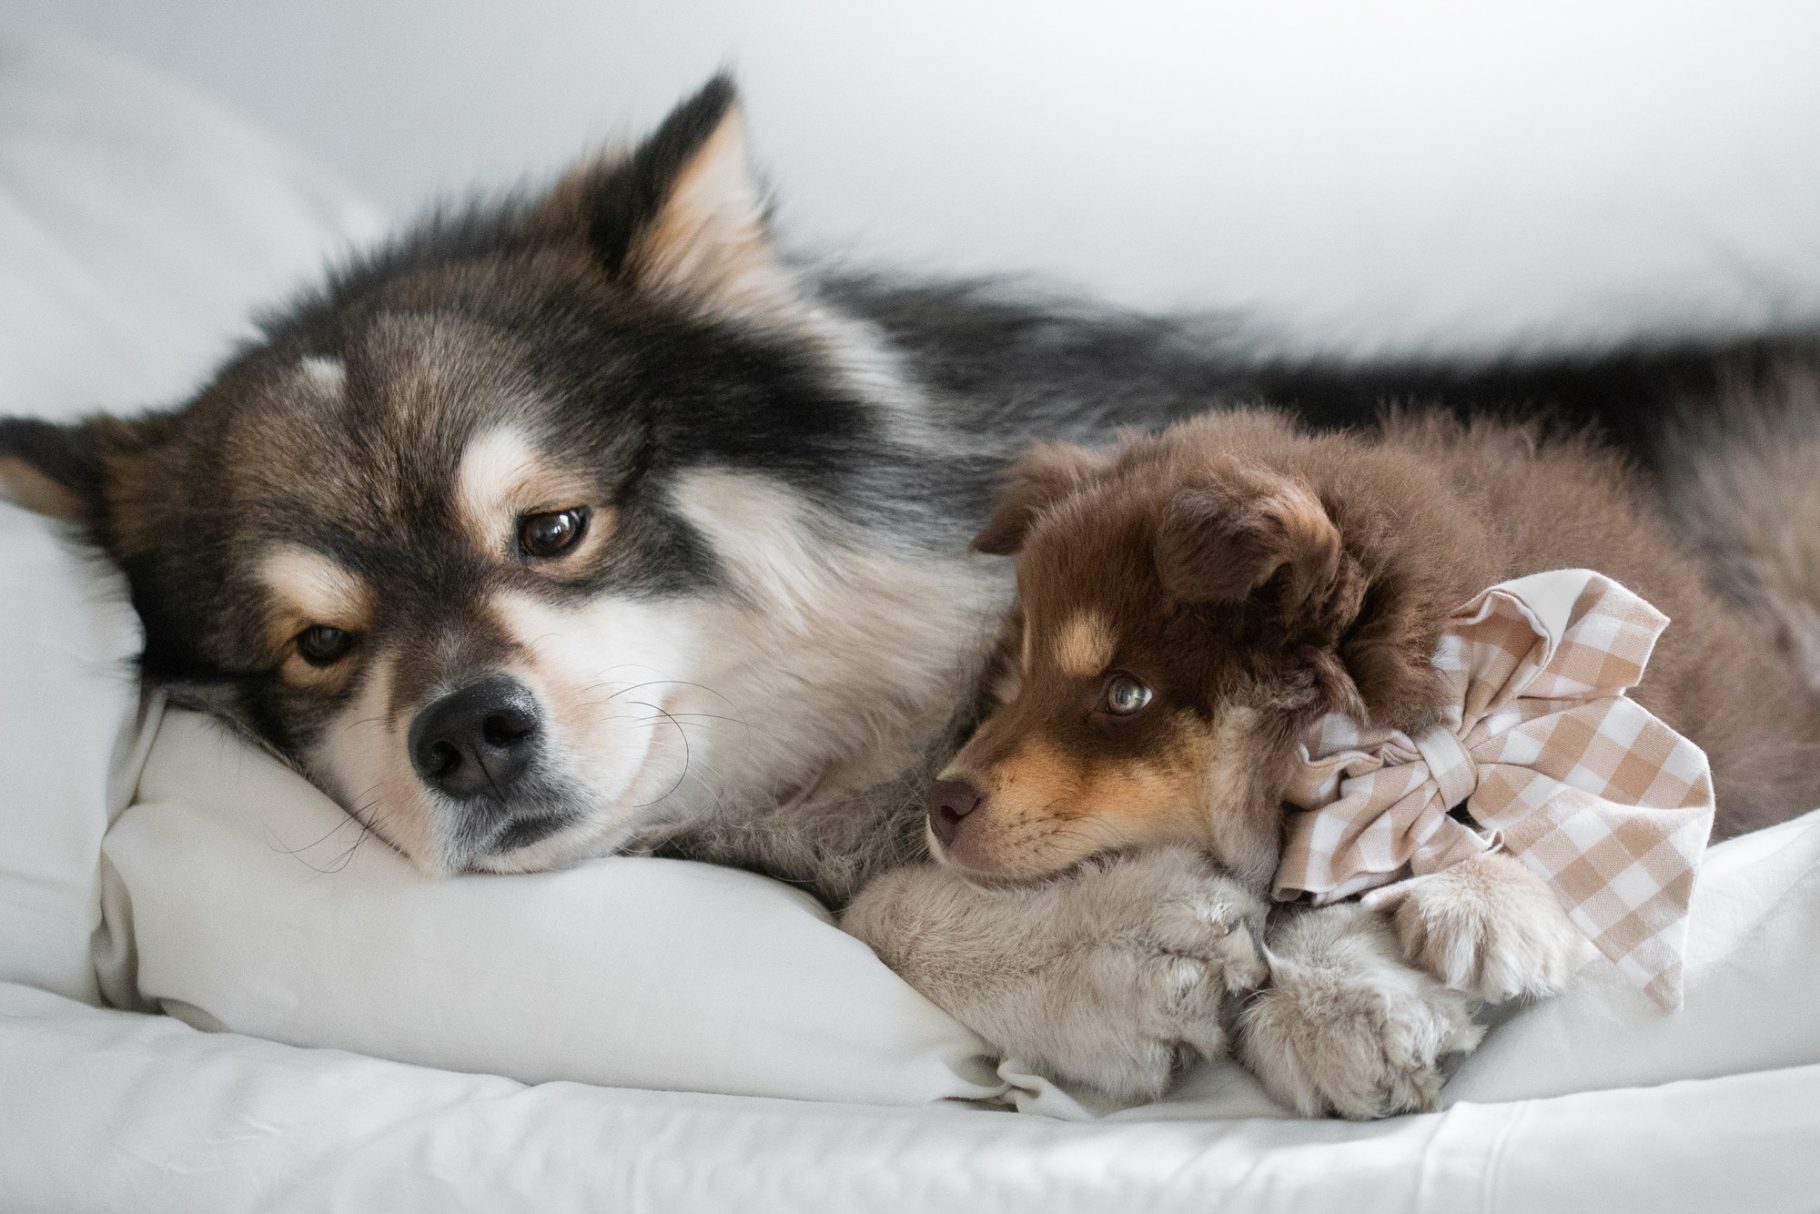 Portrait of a young Finnish Lapphund dog and puppy lying in bed together